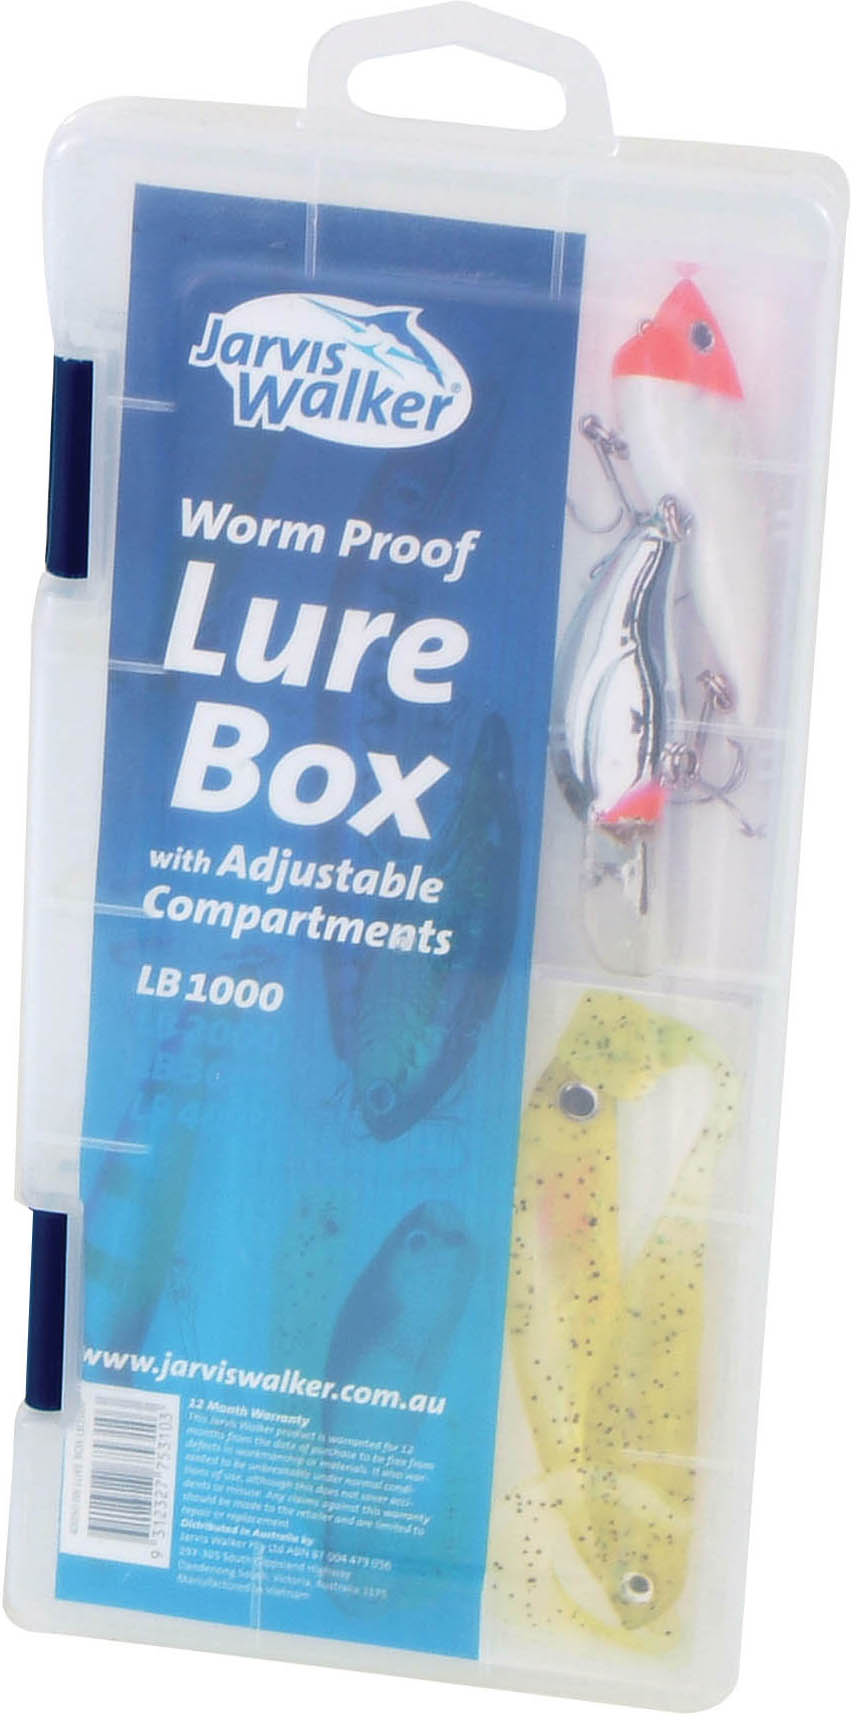 Jarvis Walker LB4000 Worm Proof Lure Box